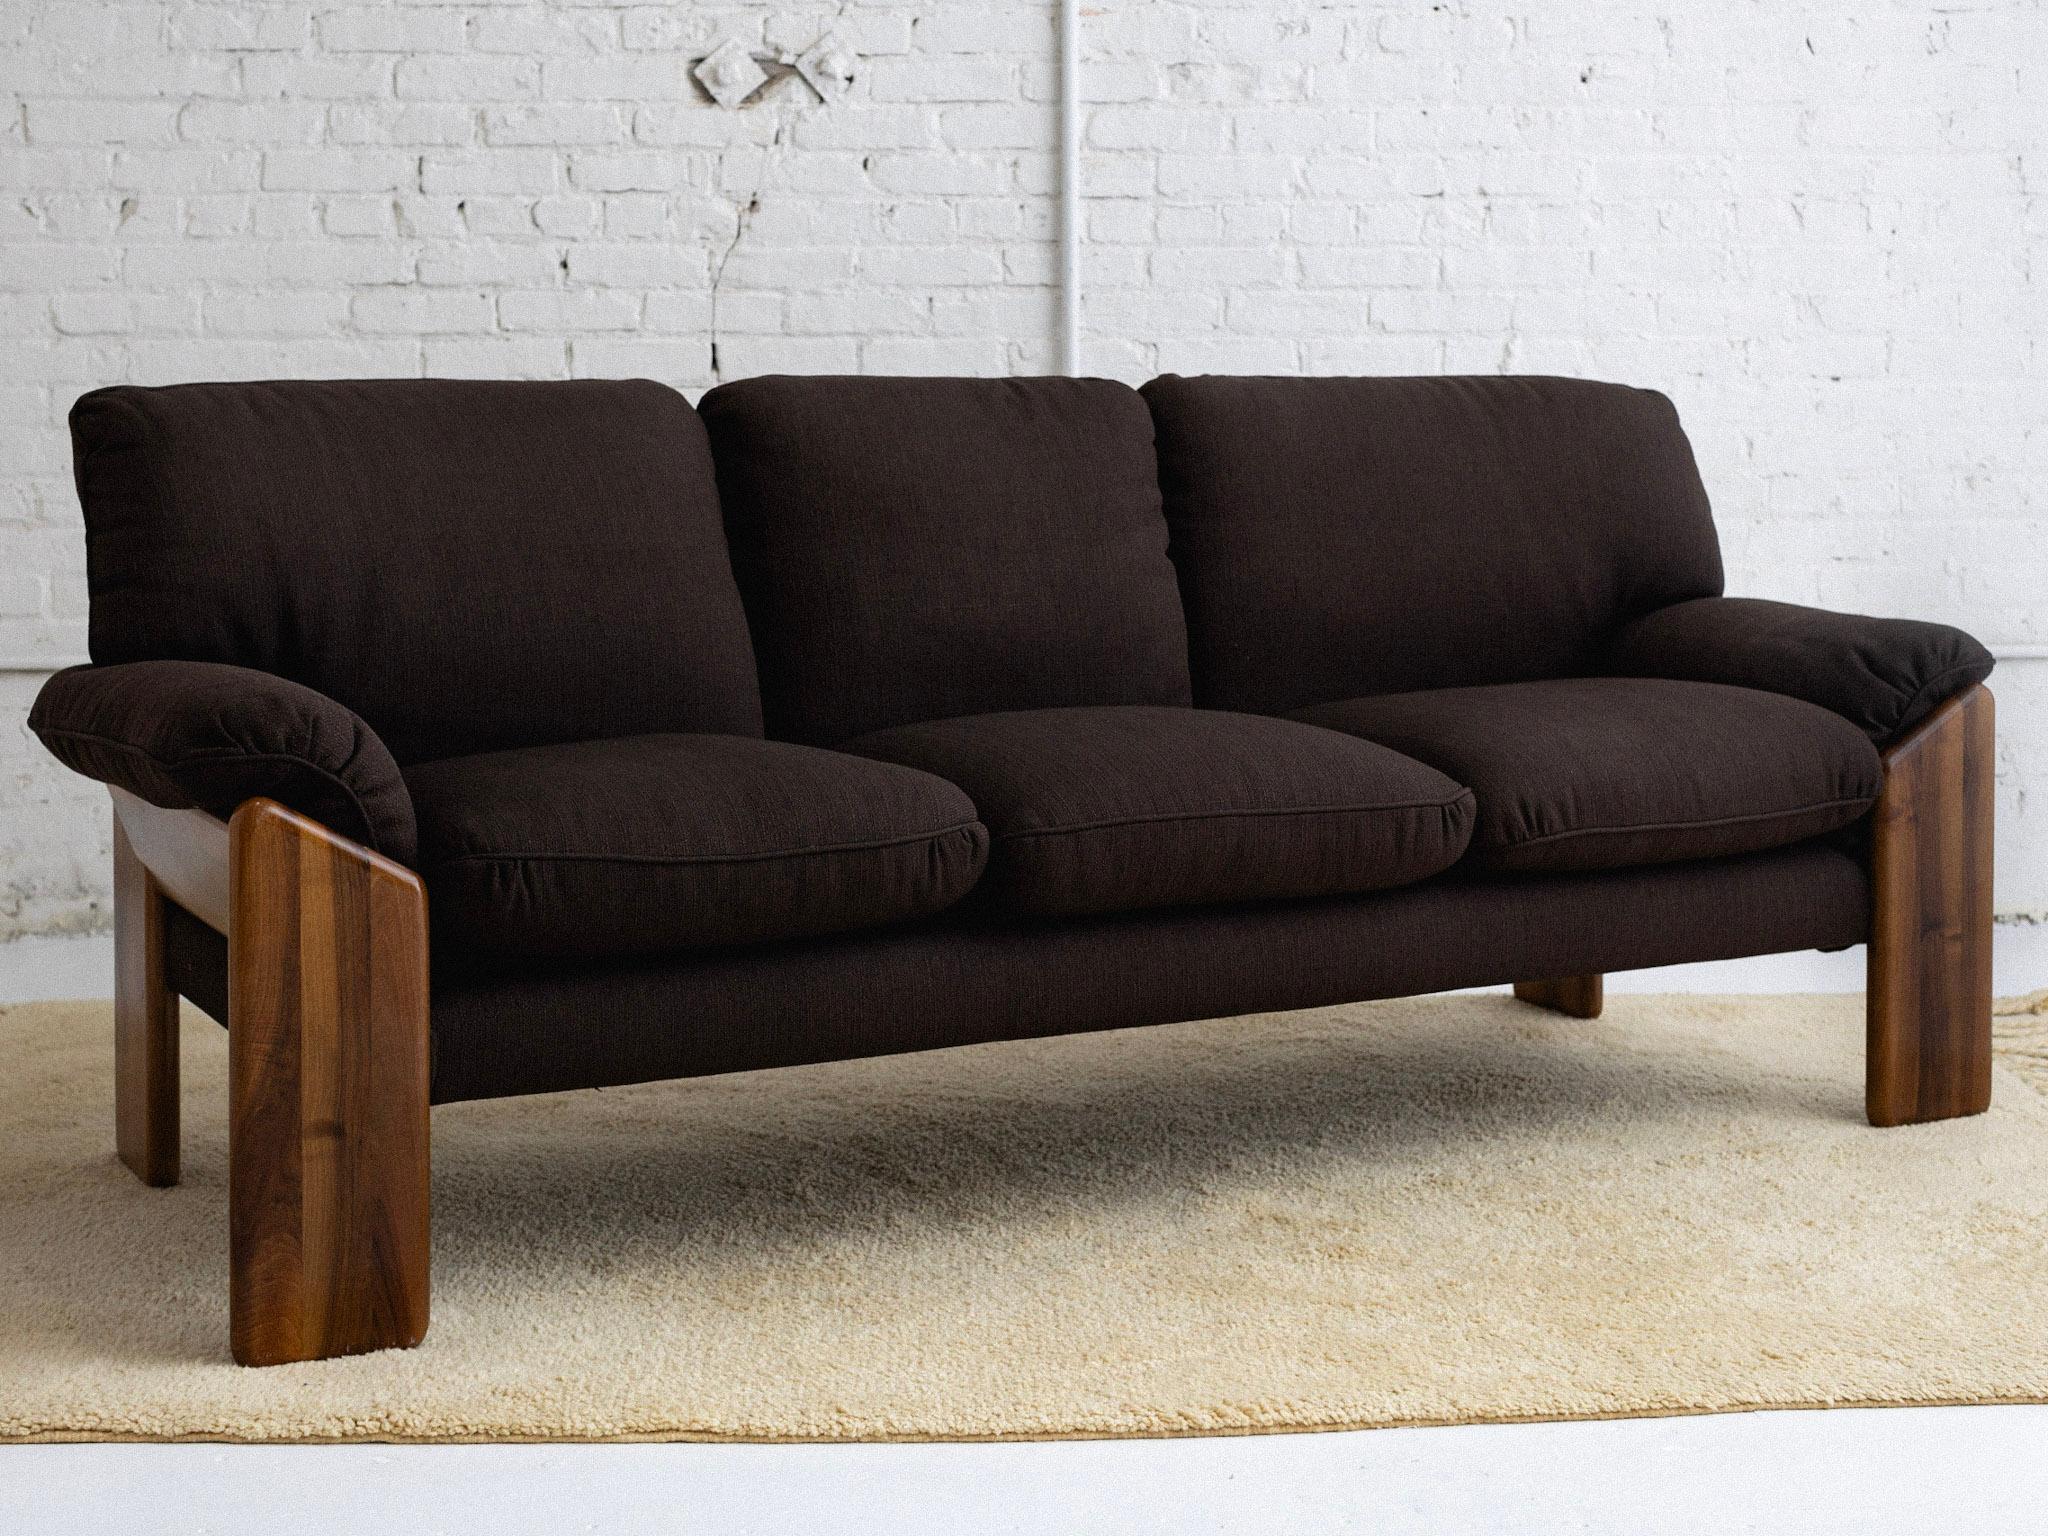 A 'Sapporo' three seat sofa designed by Mario Marenco for Mobil Girgi. A solid wood frame holds eight zipper removable cushions. Reupholstered by its previous owners in a brown woven polyester blend. Stamped “Mobil Girgi.” Sourced in Northern Italy.